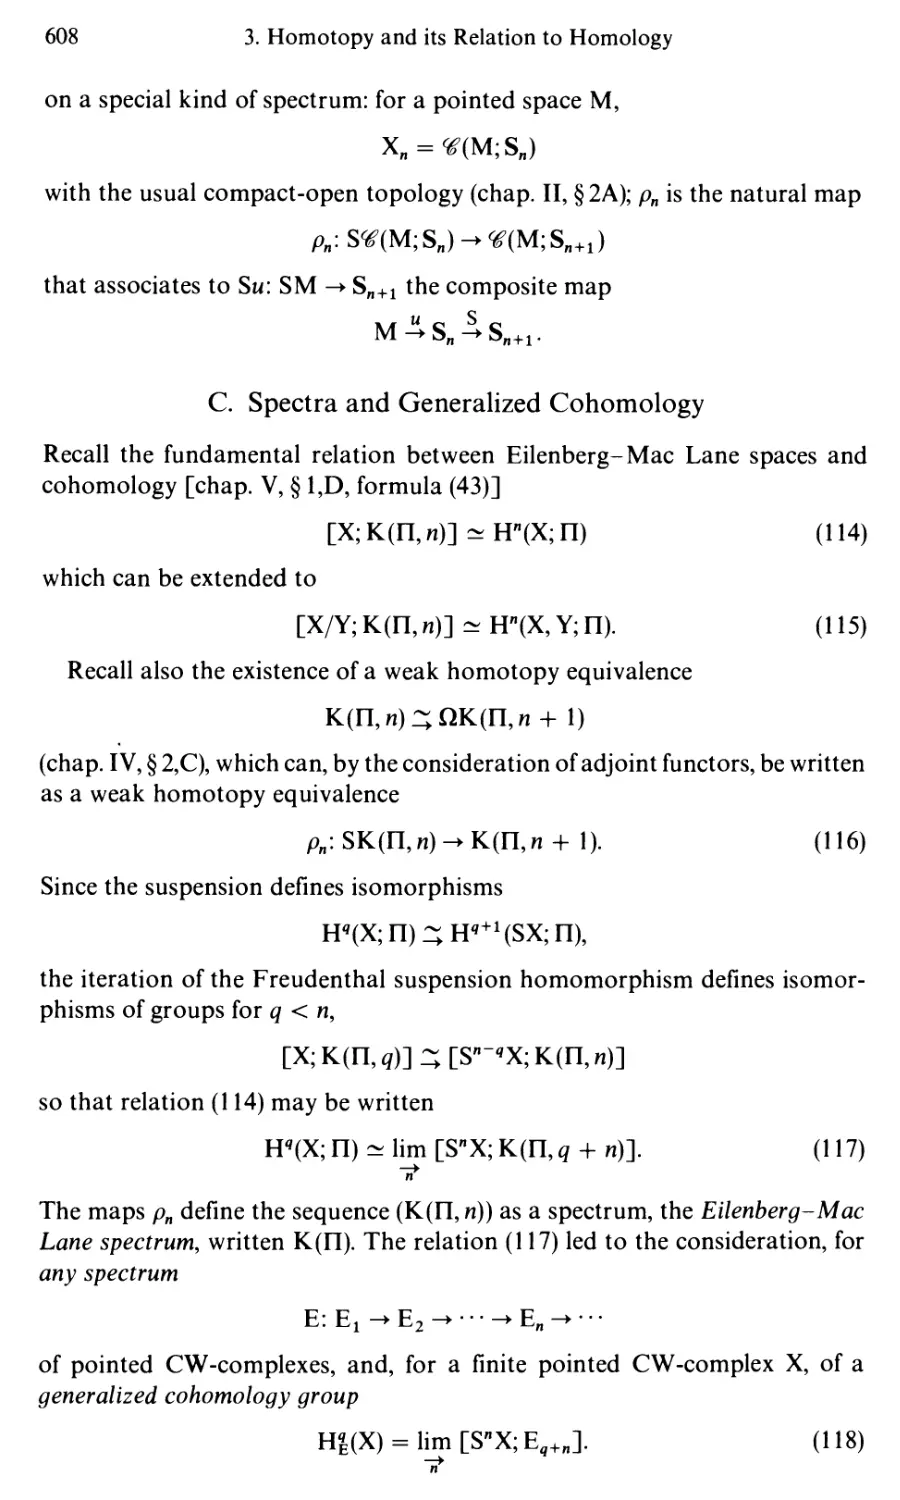 C. Spectra and Generalized Cohomology